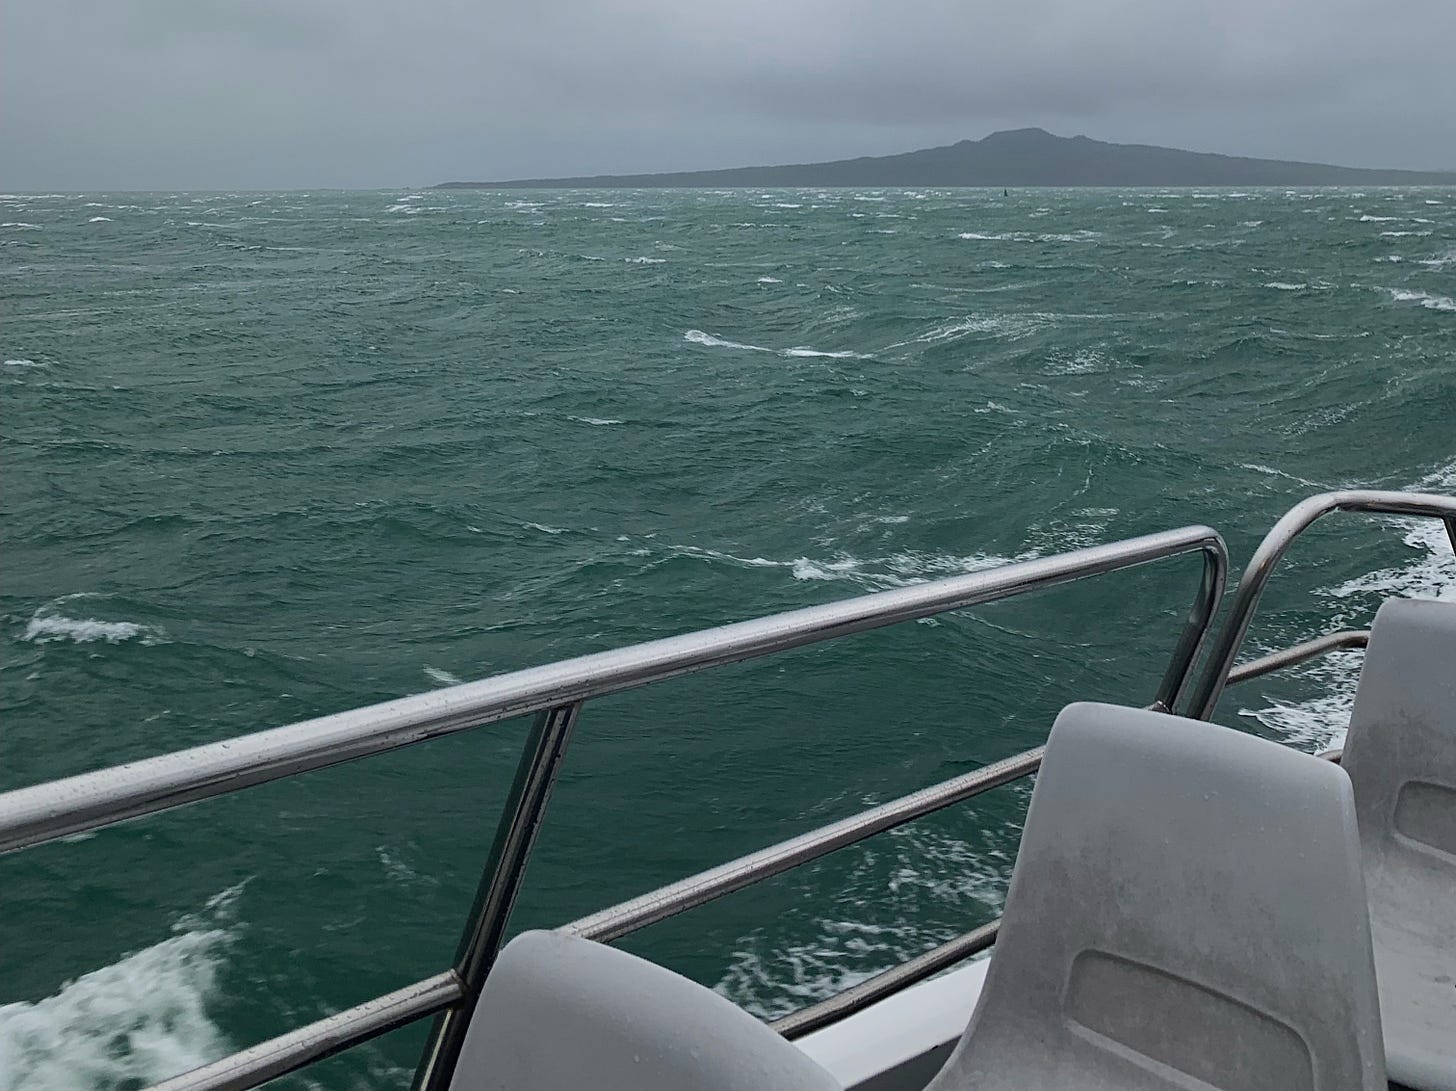 A wind-rucked sea carries a ferry across a harbour. The POV is from the top deck of a small ferry, with grey plastic seats in the foreground. In the mid-ground in the teal stromy sea and in the background is Rangitoto island, a dormant volcano against a dark grey sky